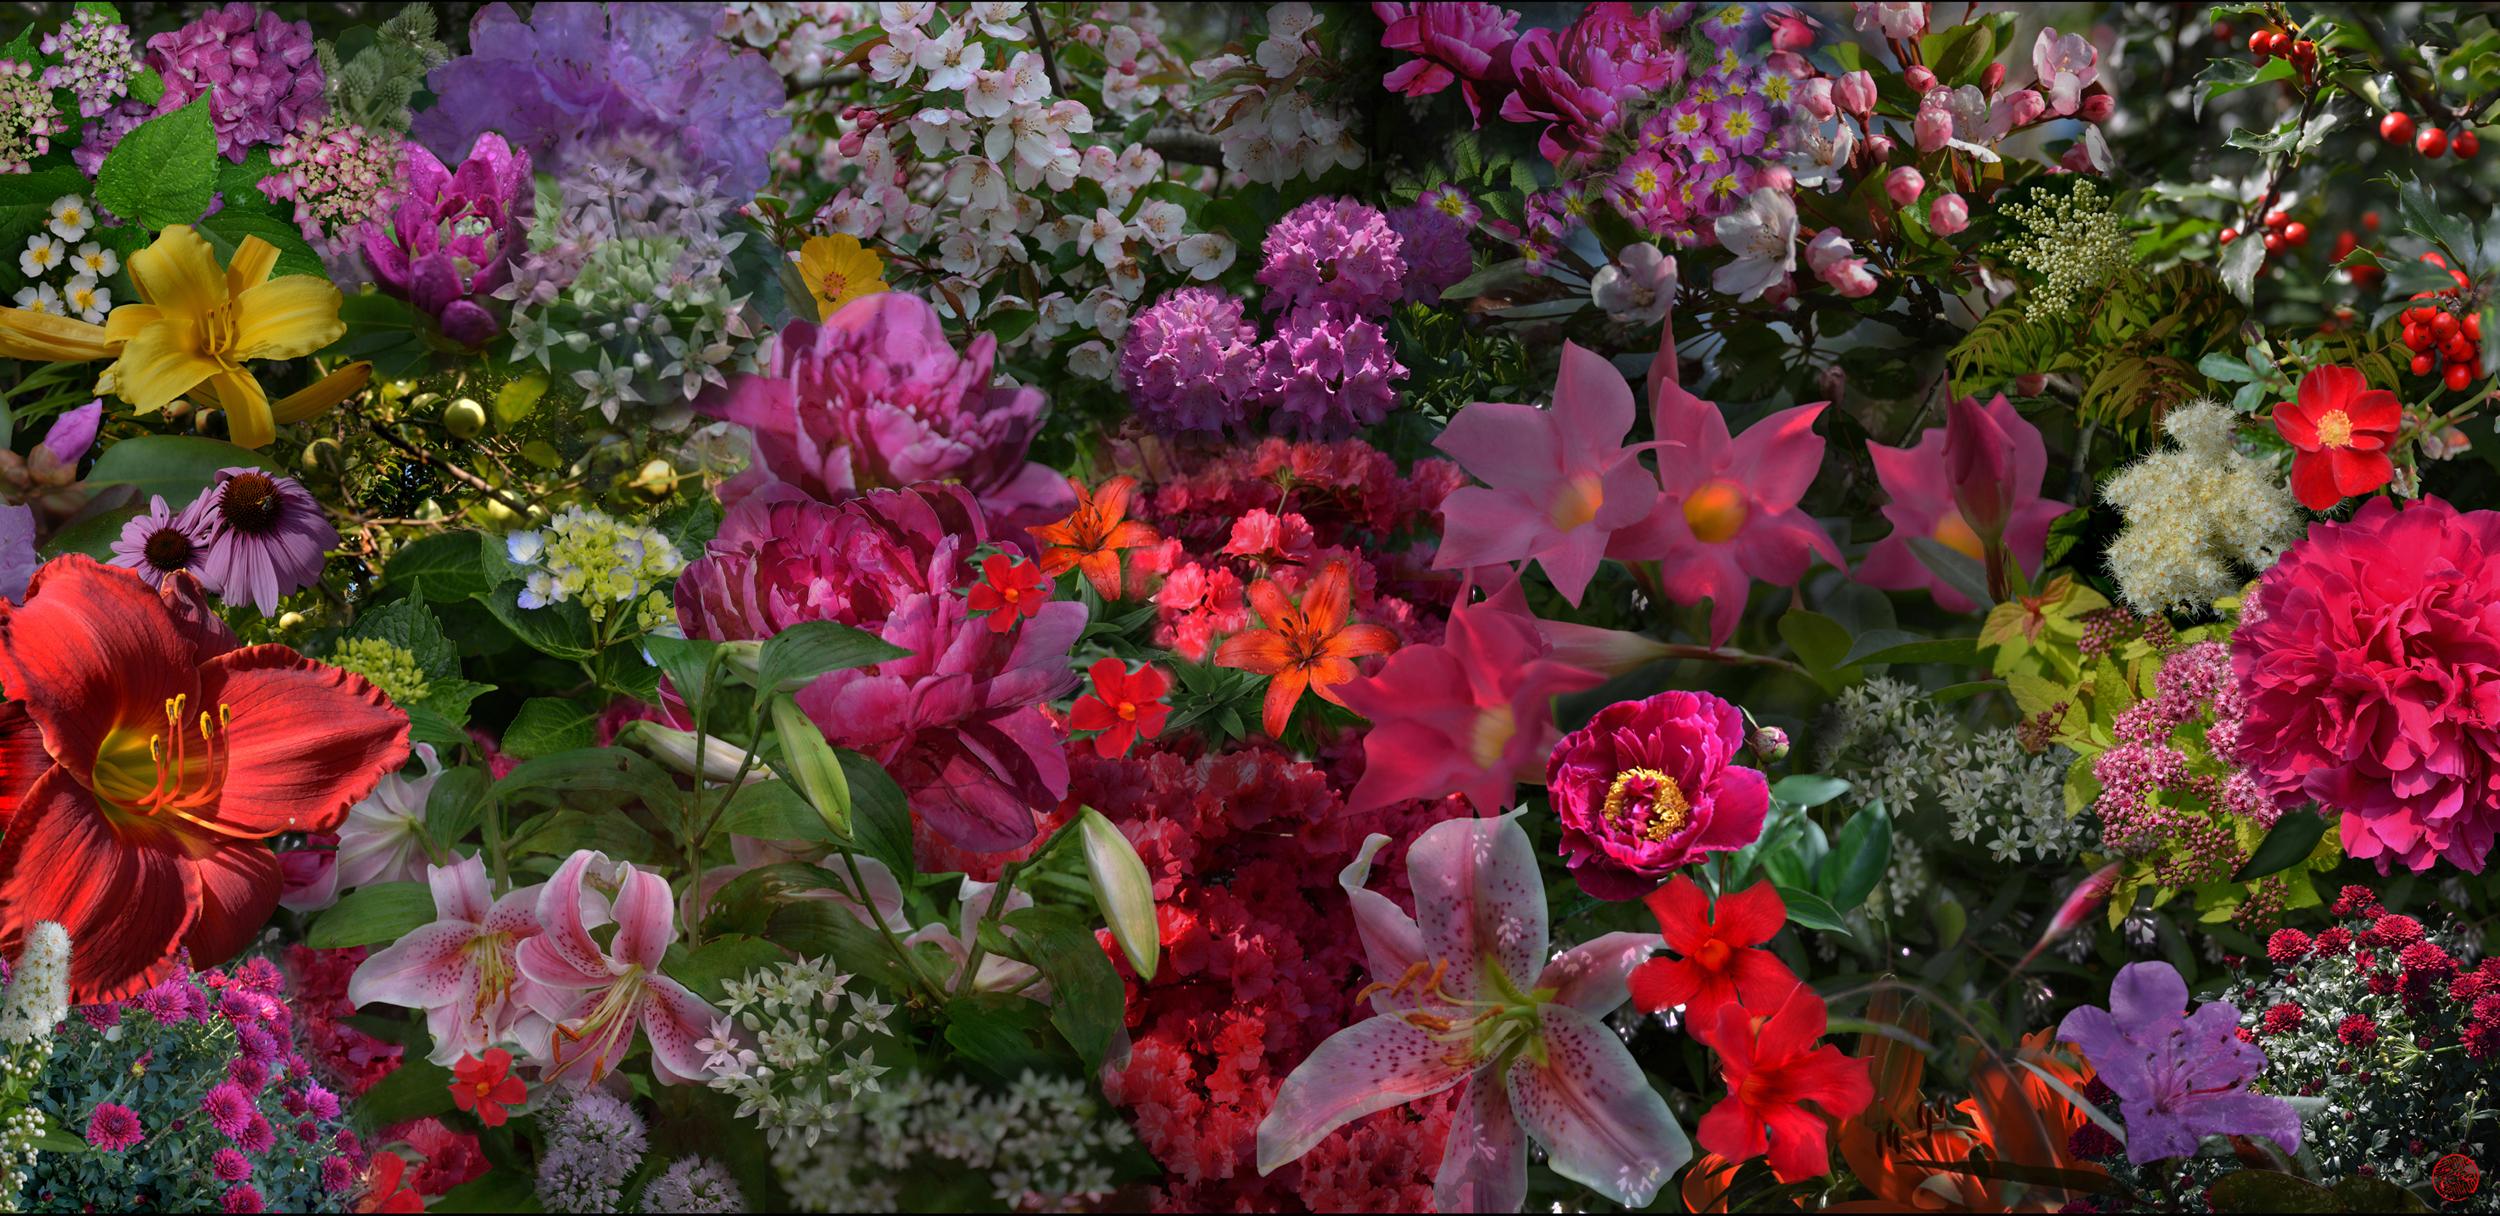 Michael K. Yamaoka  Color Photograph - American Contemporary Photo by M.Y The Persistence of Flowers, South Salem, NY  